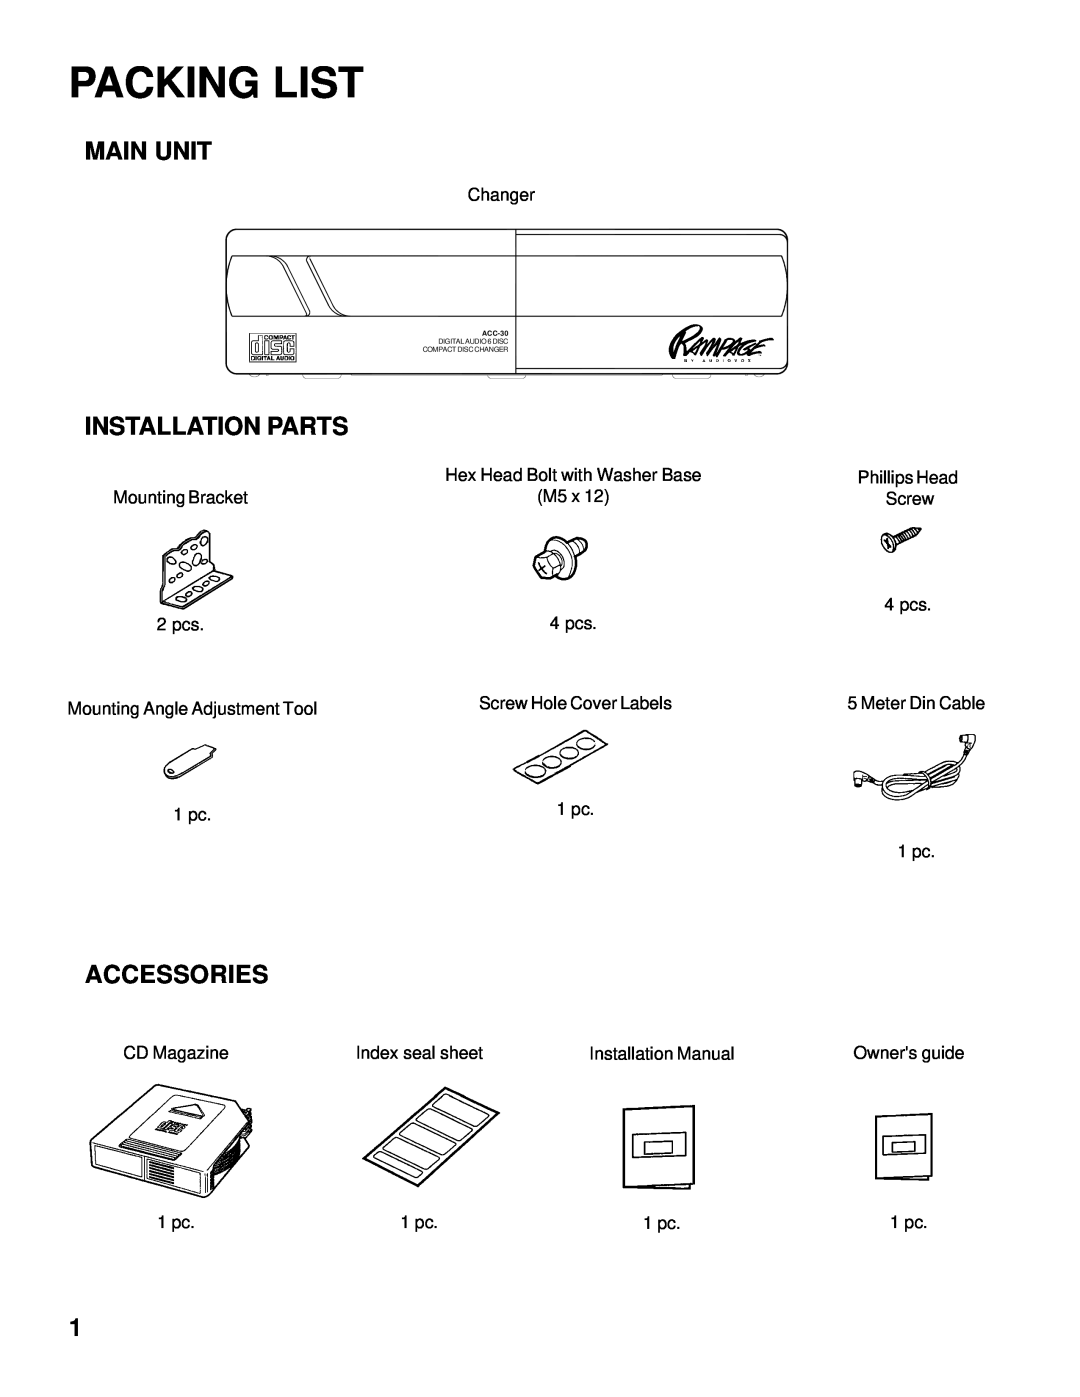 Audiovox ACC-30 installation manual Packing List, Main Unit, Installation Parts, Accessories 